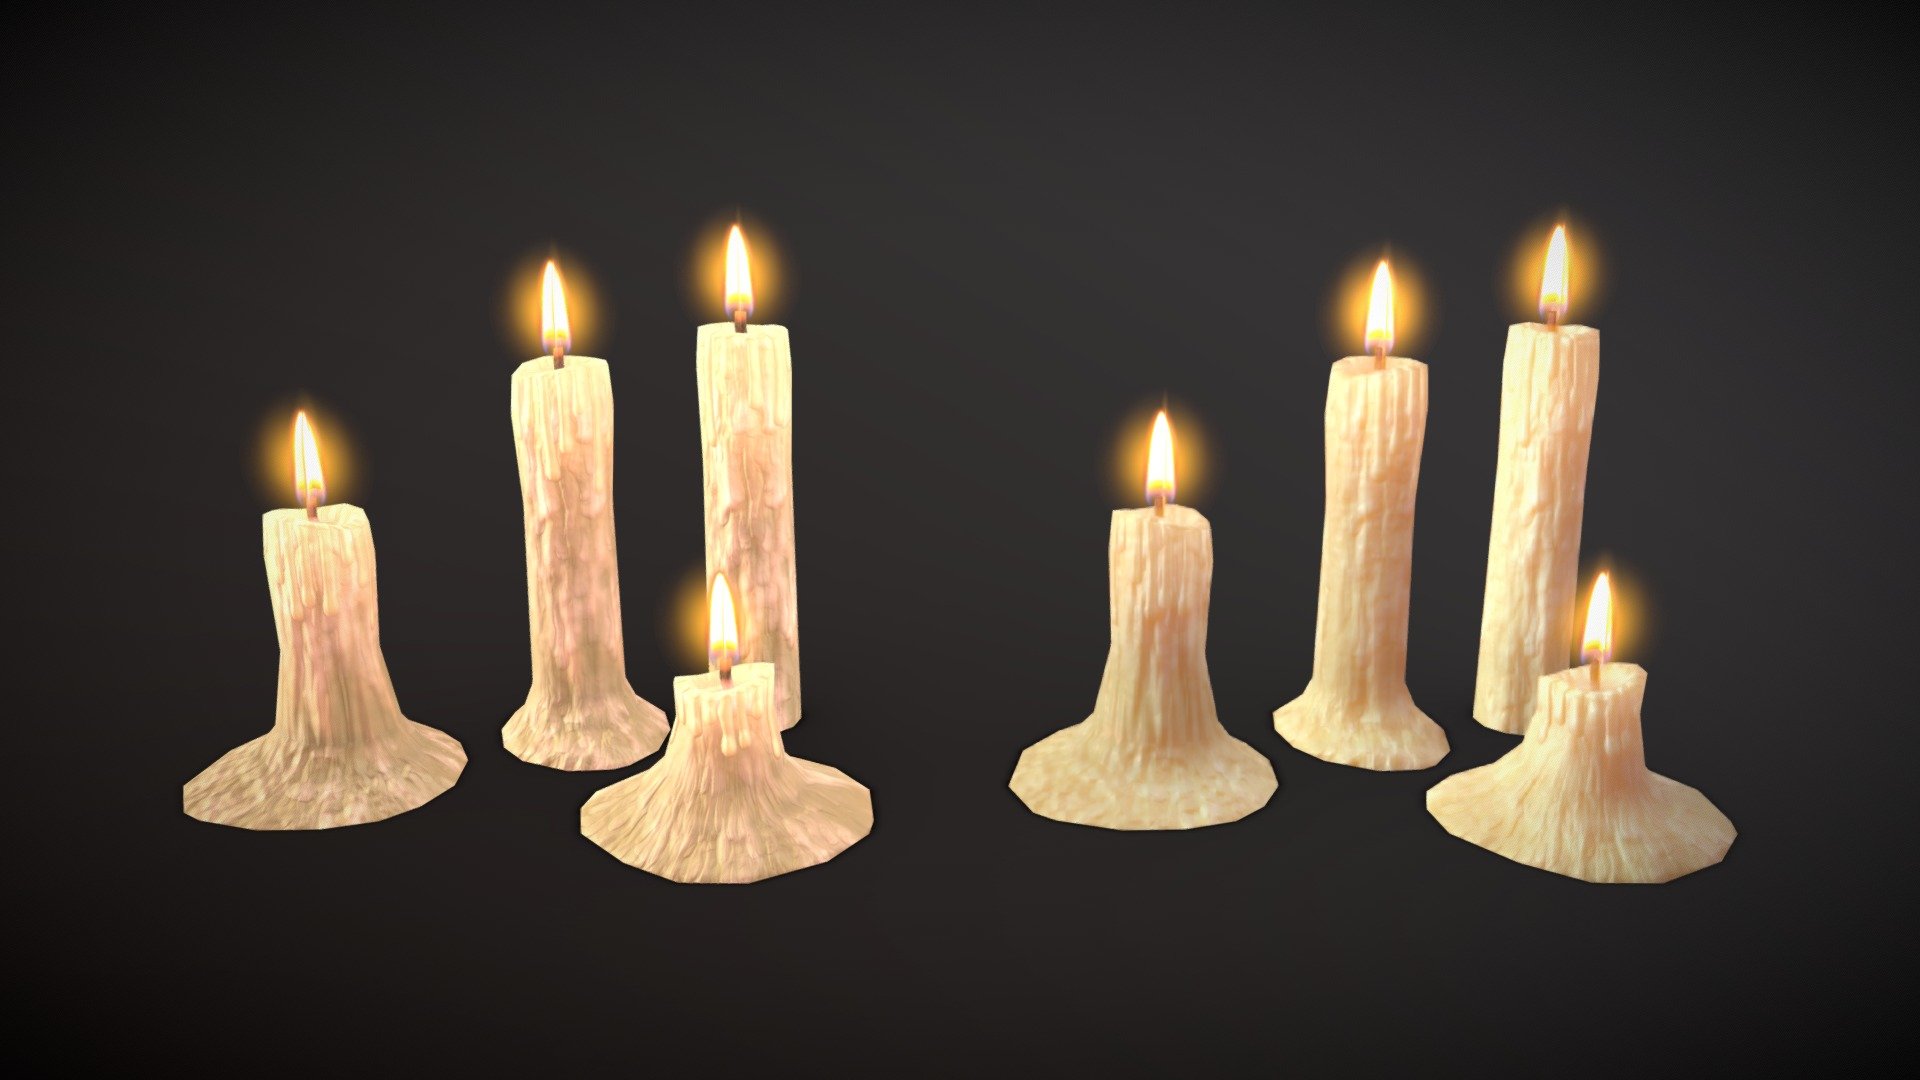 Set of 4 lowpoly candles.

2048x2048 textures: base color, roughness, normal and emissive.
The flame uses a 512x512 image with alpha transparency.

The emissive texture is intendede to be used to simulate the efect of the light glowing through the candle, this effect can be improved using subsurface scatering. The candles on the left only use the emissive texture, the ones on the right use both the emissive texture and a subsurface shader.

Formats: .fbx and .obj

Individual files for each piece are included in the Additional File 3d model